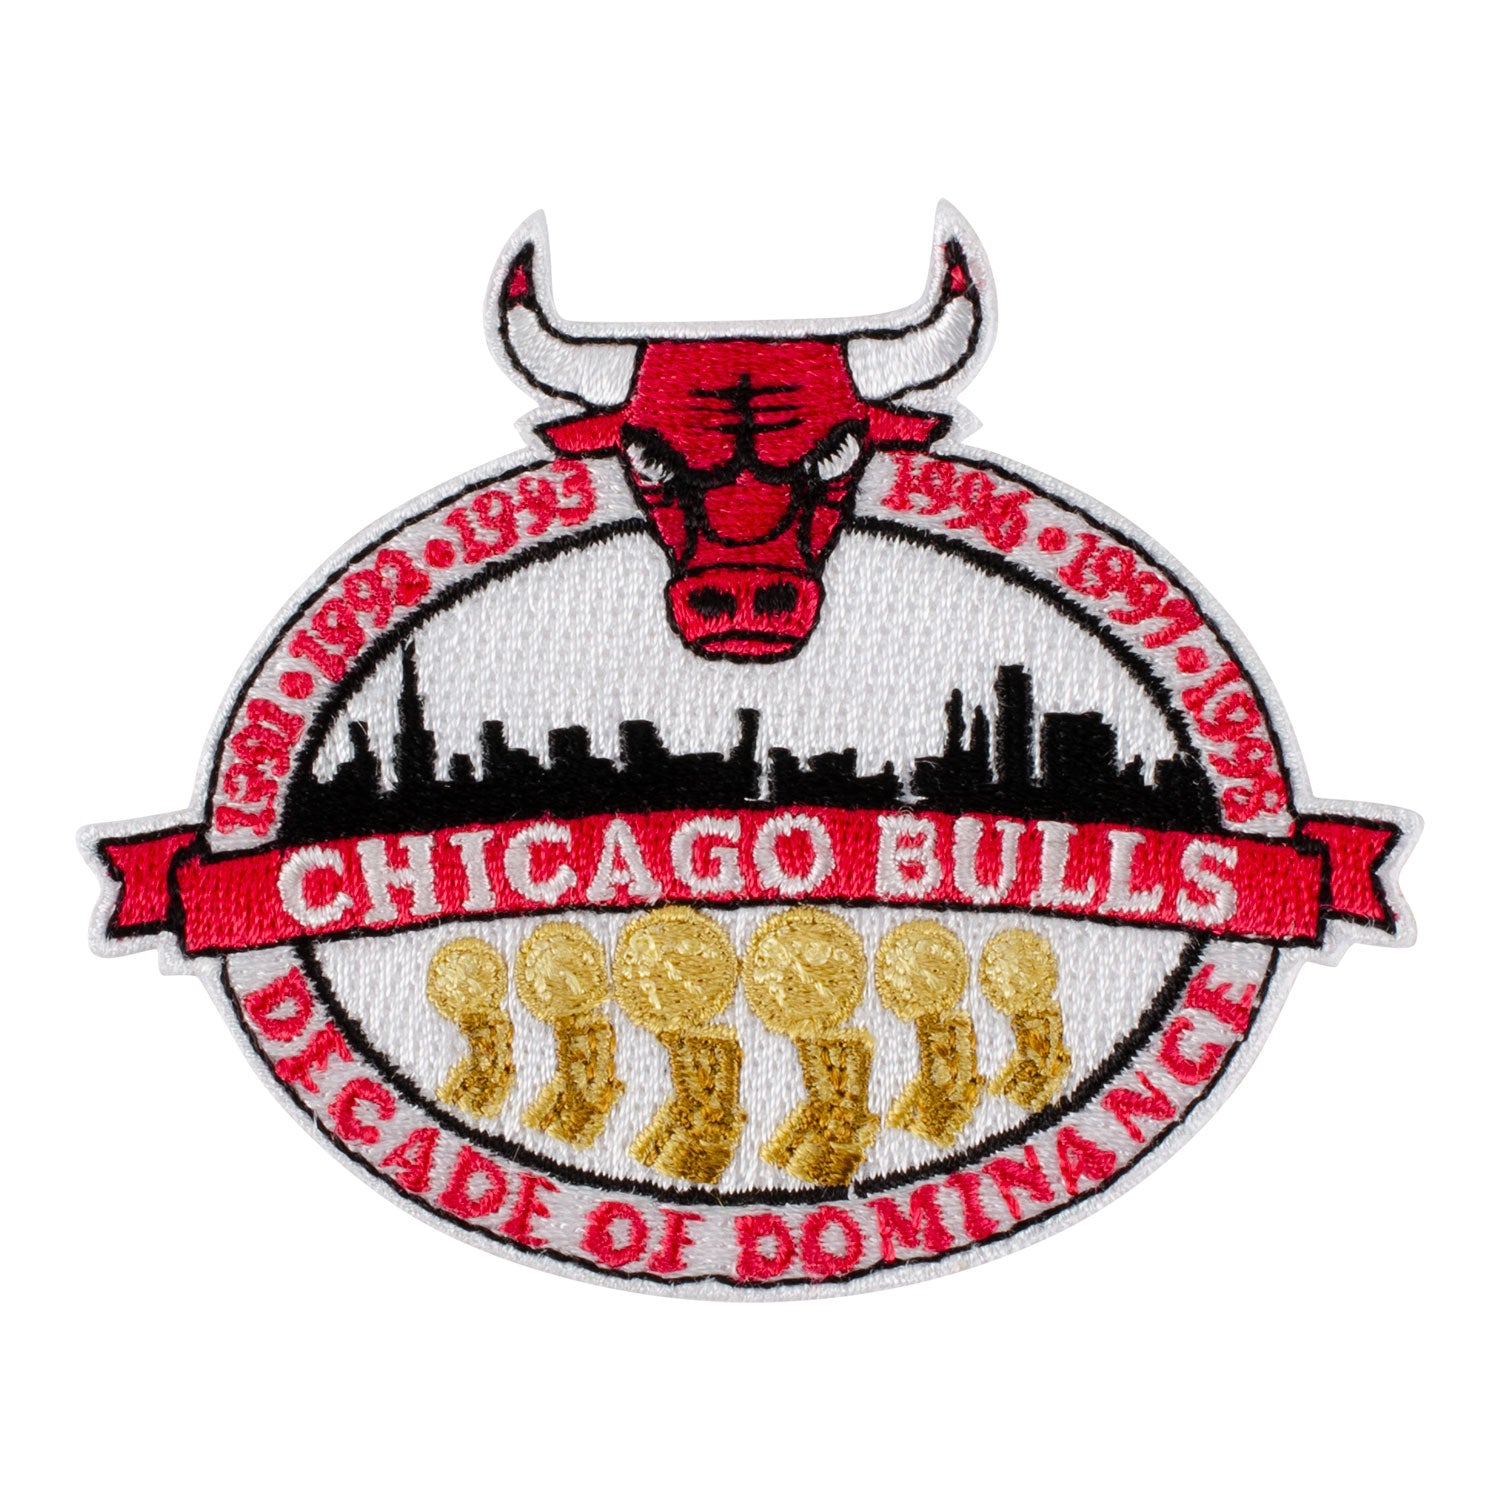 Chicago Bulls Decade of Dominance Emblem - front view